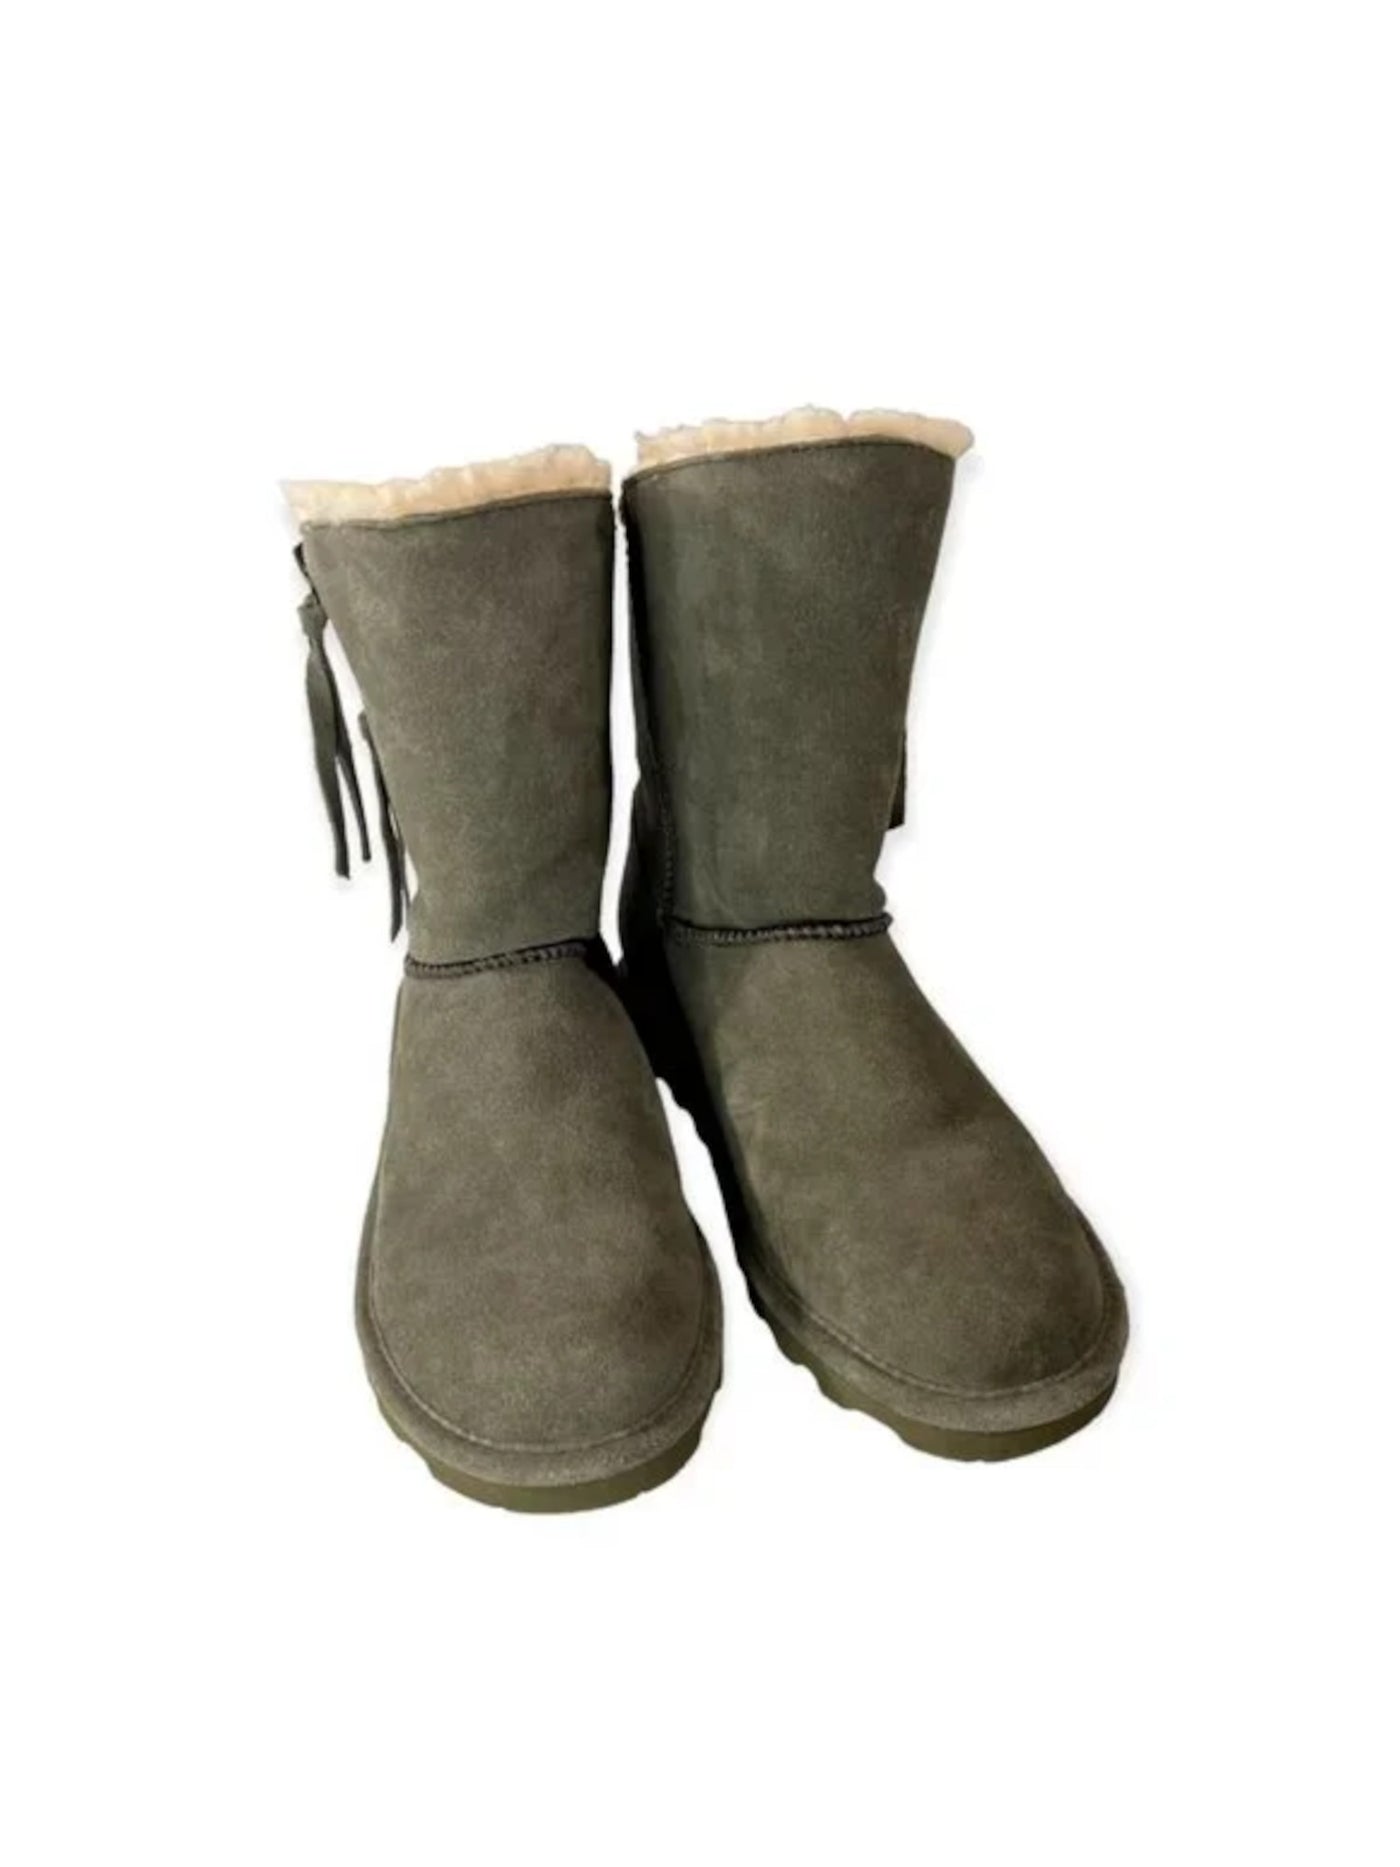 BEAR PAW Womens Green Water Repellent Zipper Accent Mimi Round Toe Winter Boots 5 M